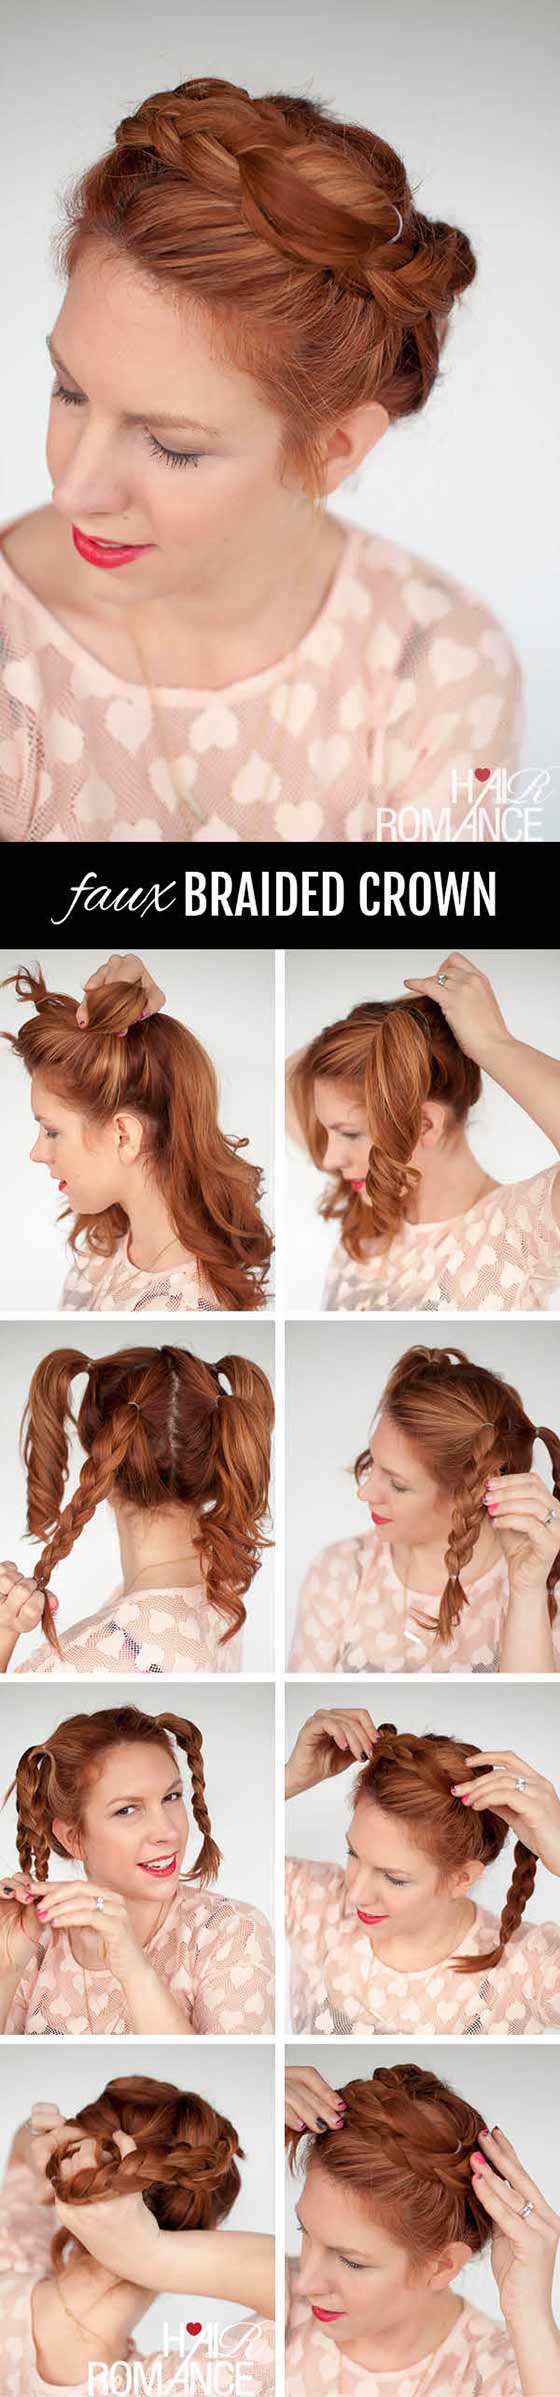 Faux braided crown hairstyle for long hair